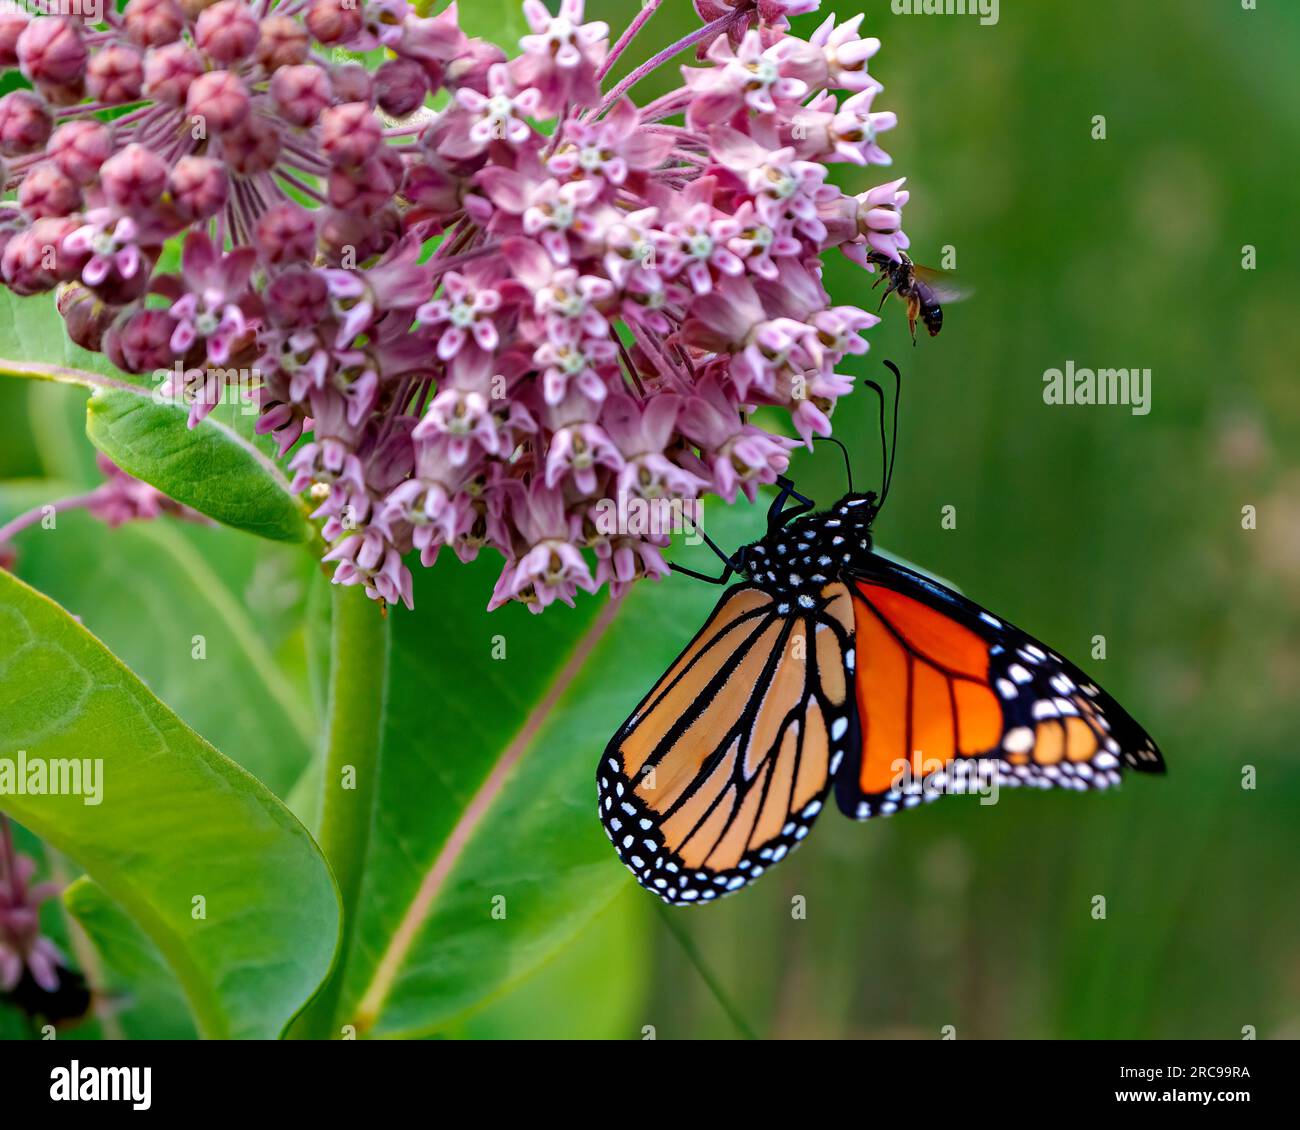 Monarch Butterfly close-up side view sipping or drinking nectar from a milkweed plant with a green background in its environment and habitat . Stock Photo